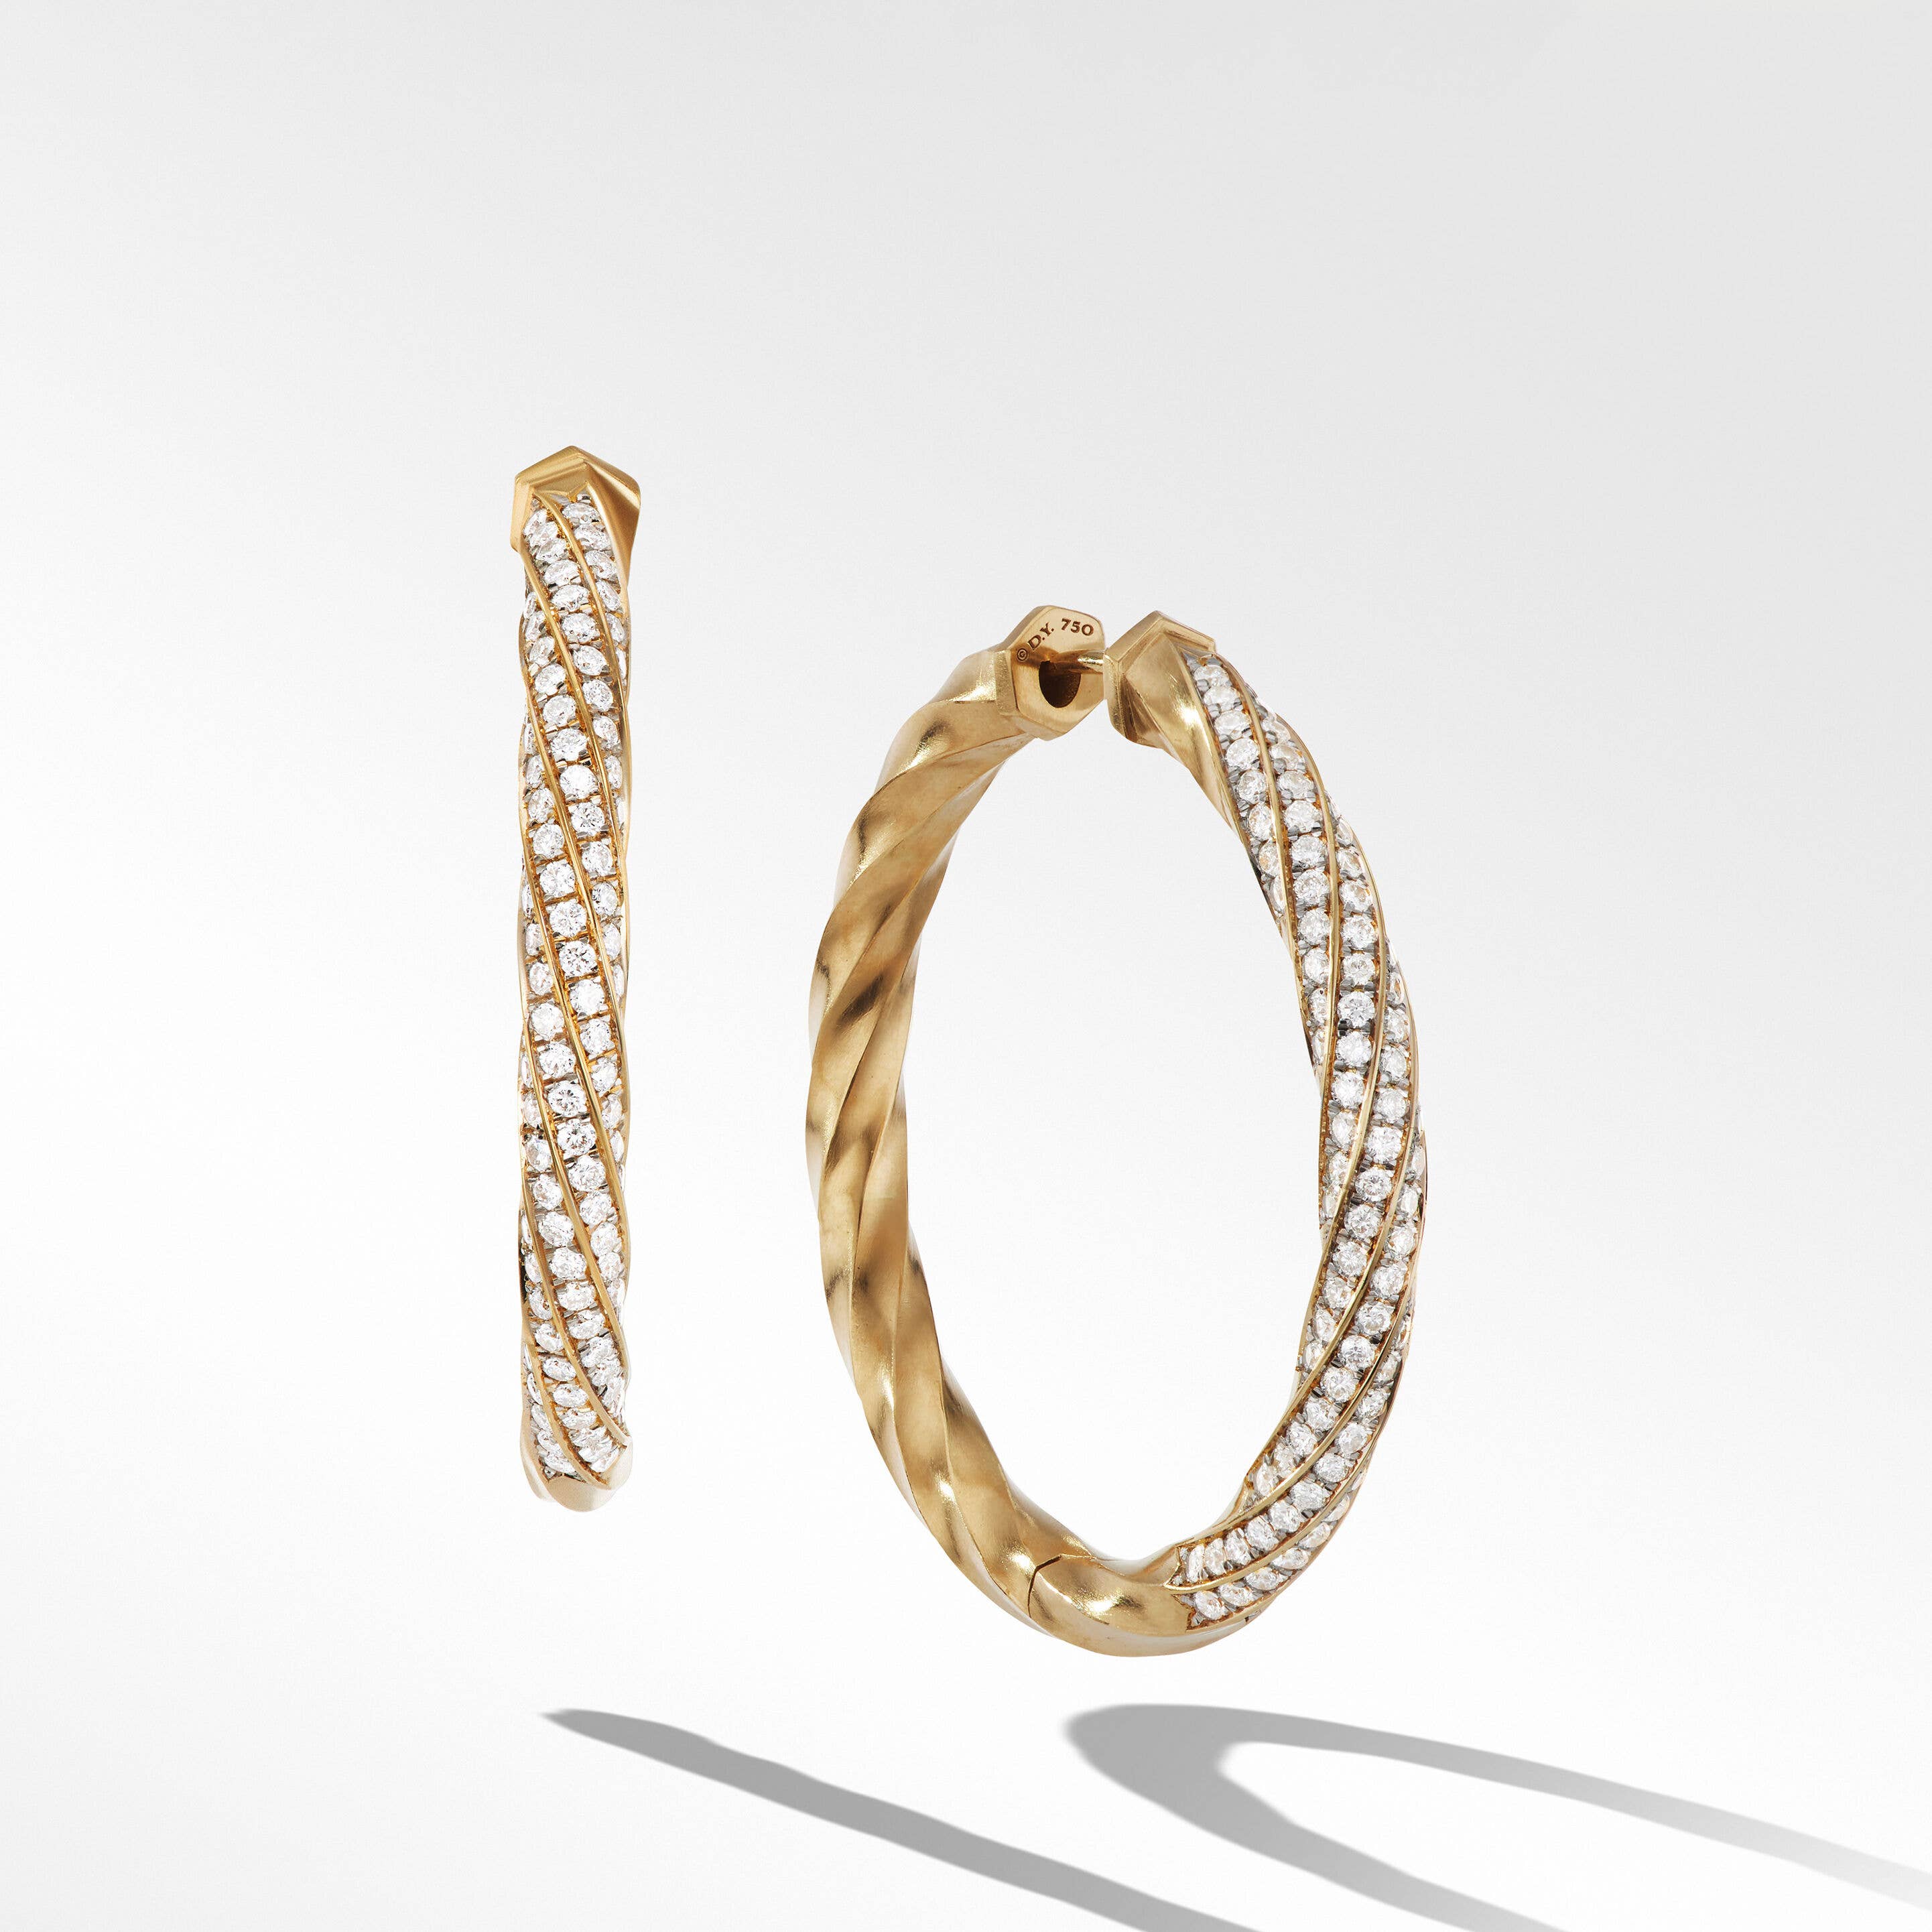 Cable Edge Hoop Earrings in Recycled 18K Yellow Gold with Diamonds, 1.5"